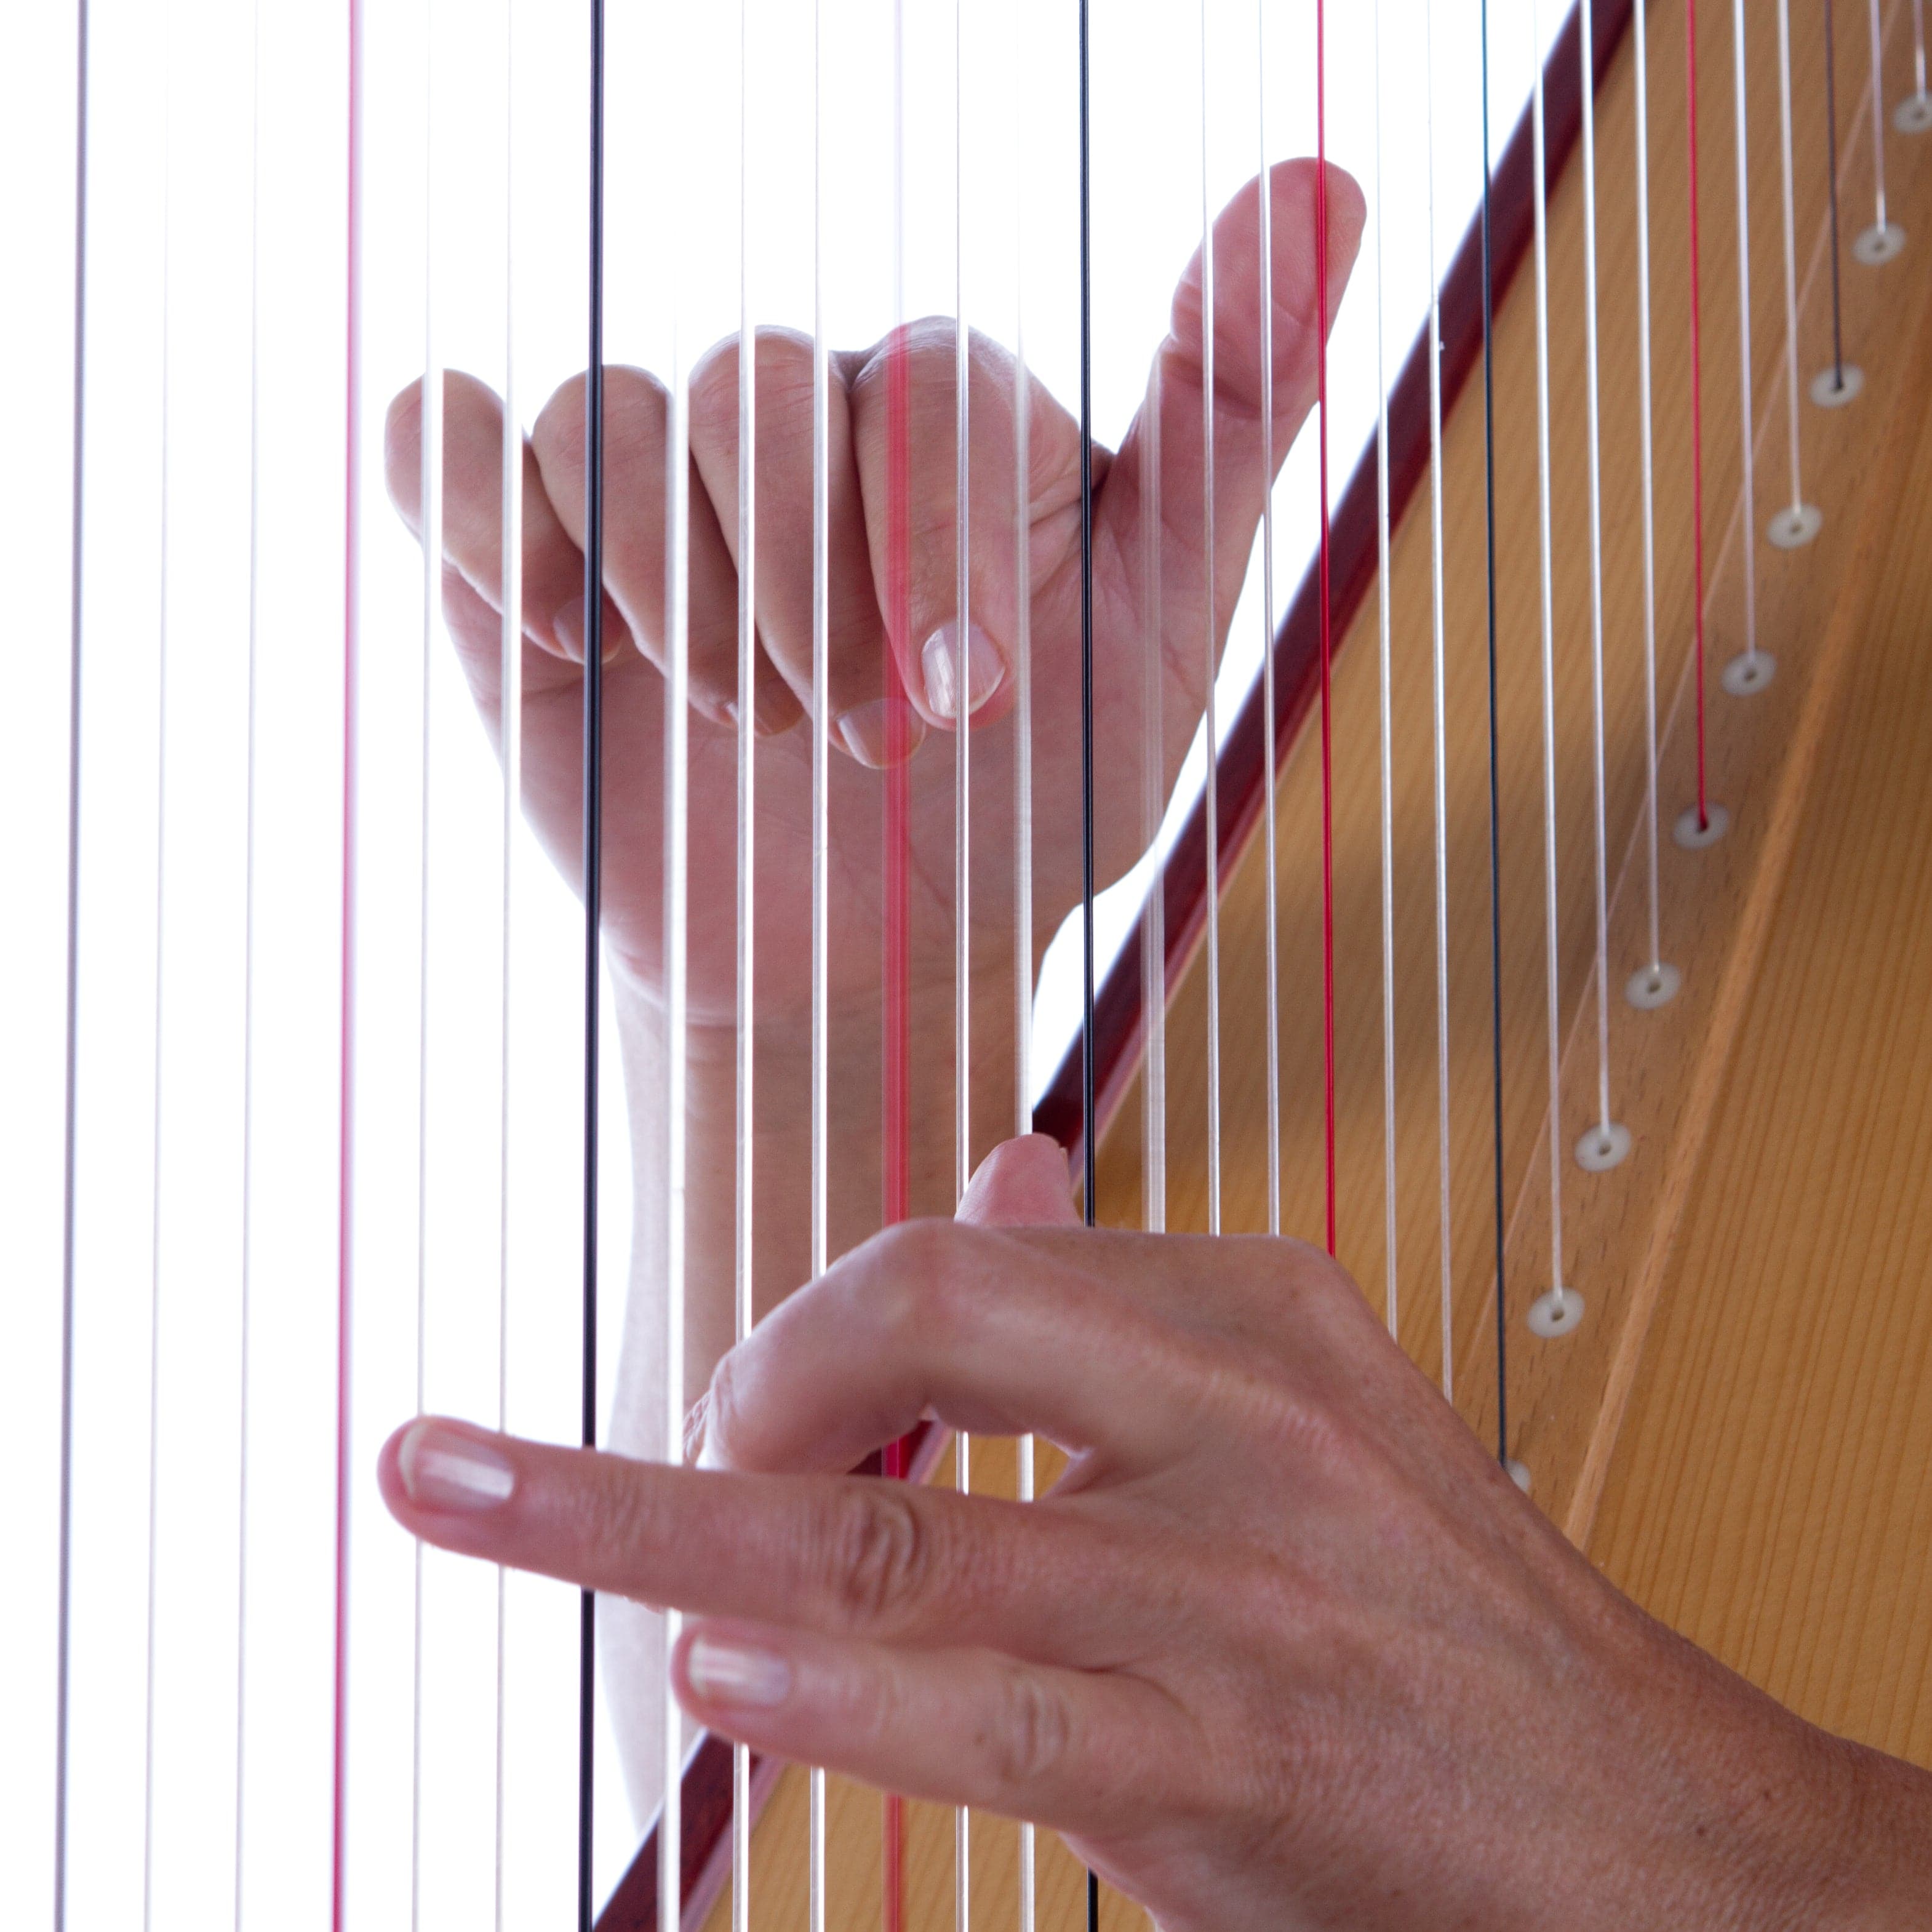 CD Harp for Hearts, composed and played by Ingrid Hütten